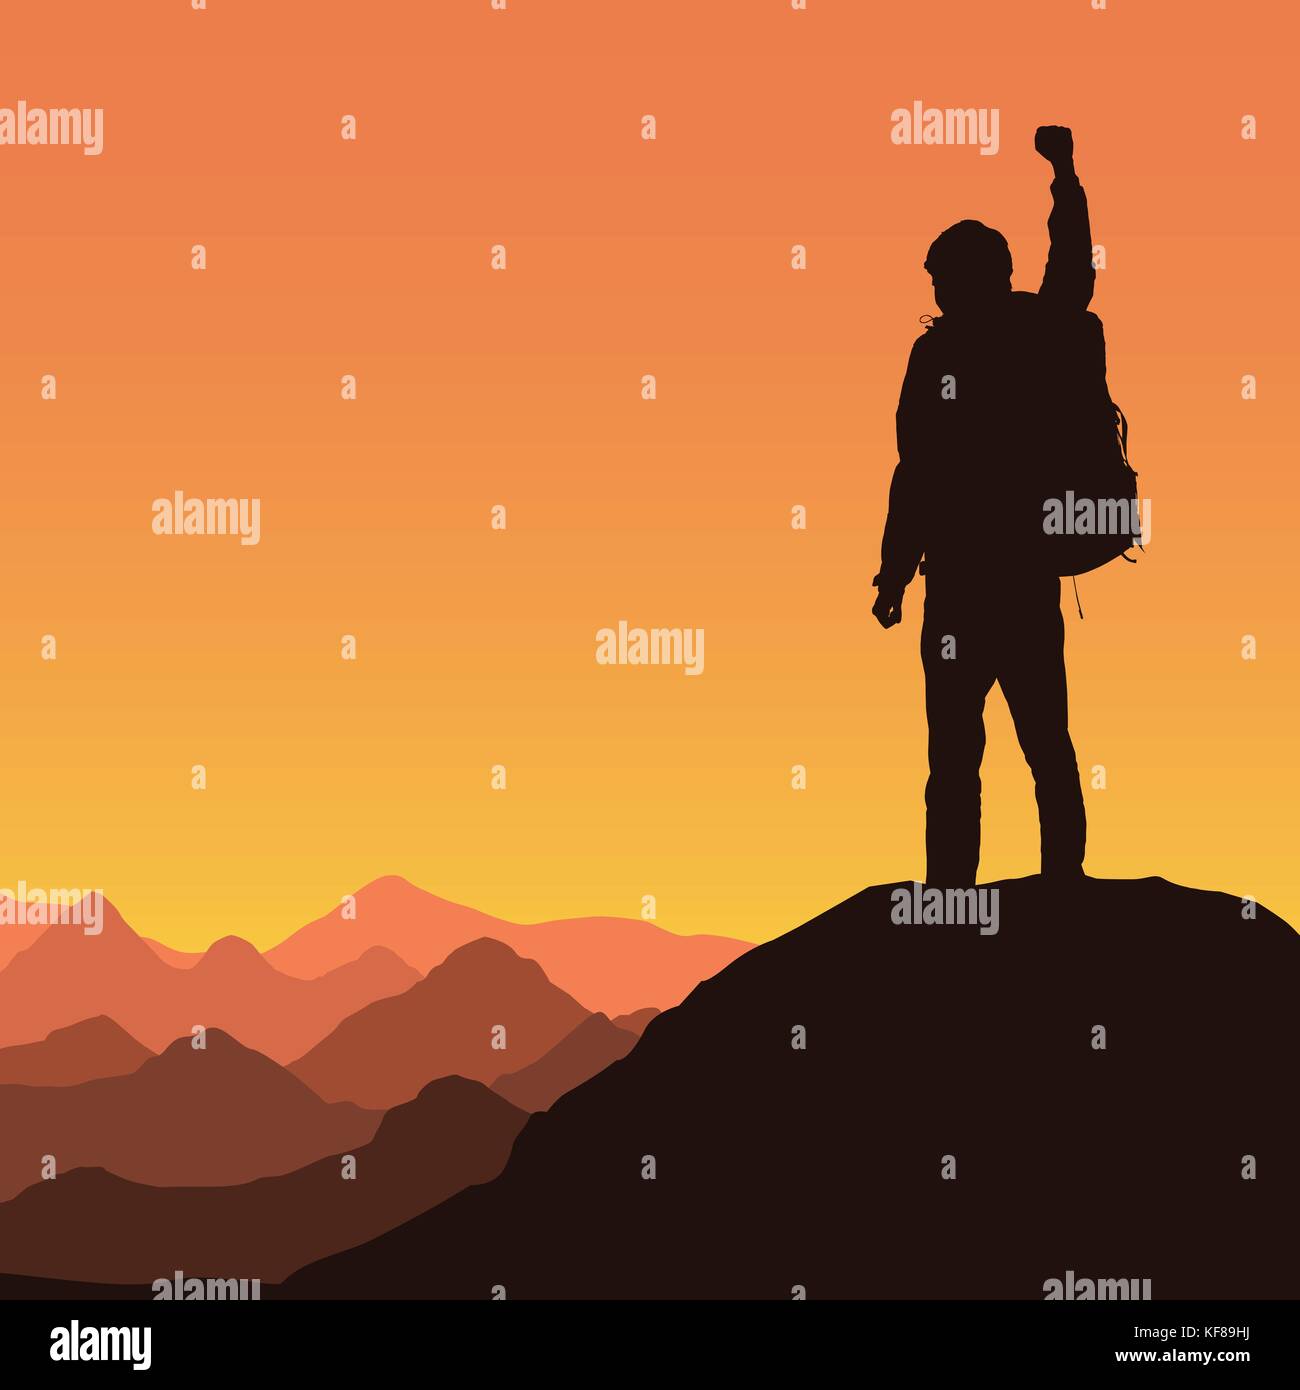 Vector illustration of a mountain landscape with a realistic silhouette of a climber at the top of a rock with a winning gesture under a orange sky Stock Vector